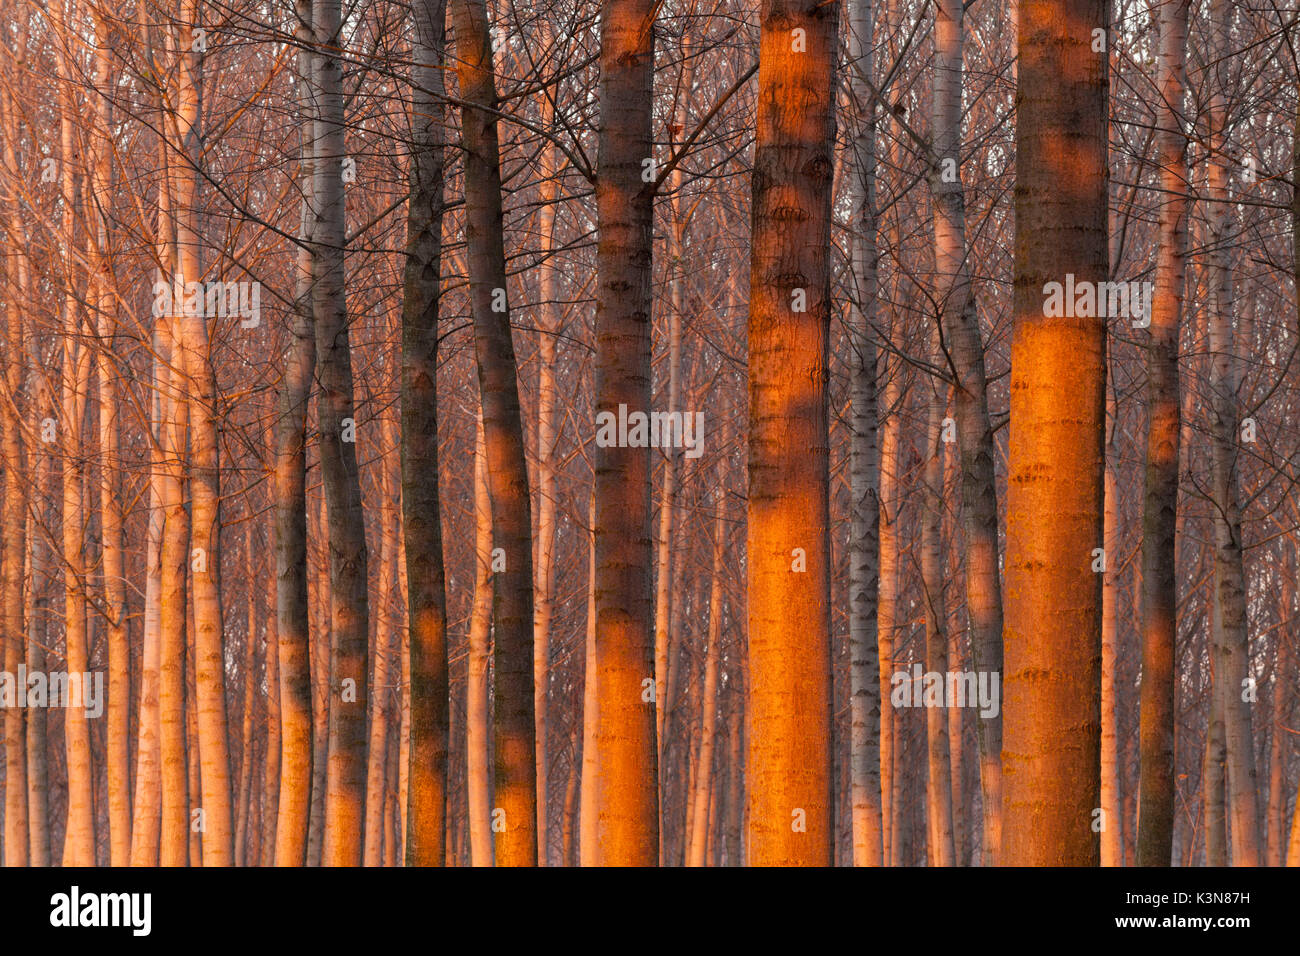 Caselle Landi, Po river, Po valley, Cremona province, Lombardy, Italy, Europe. Details on poplars trunk at sunset. Stock Photo